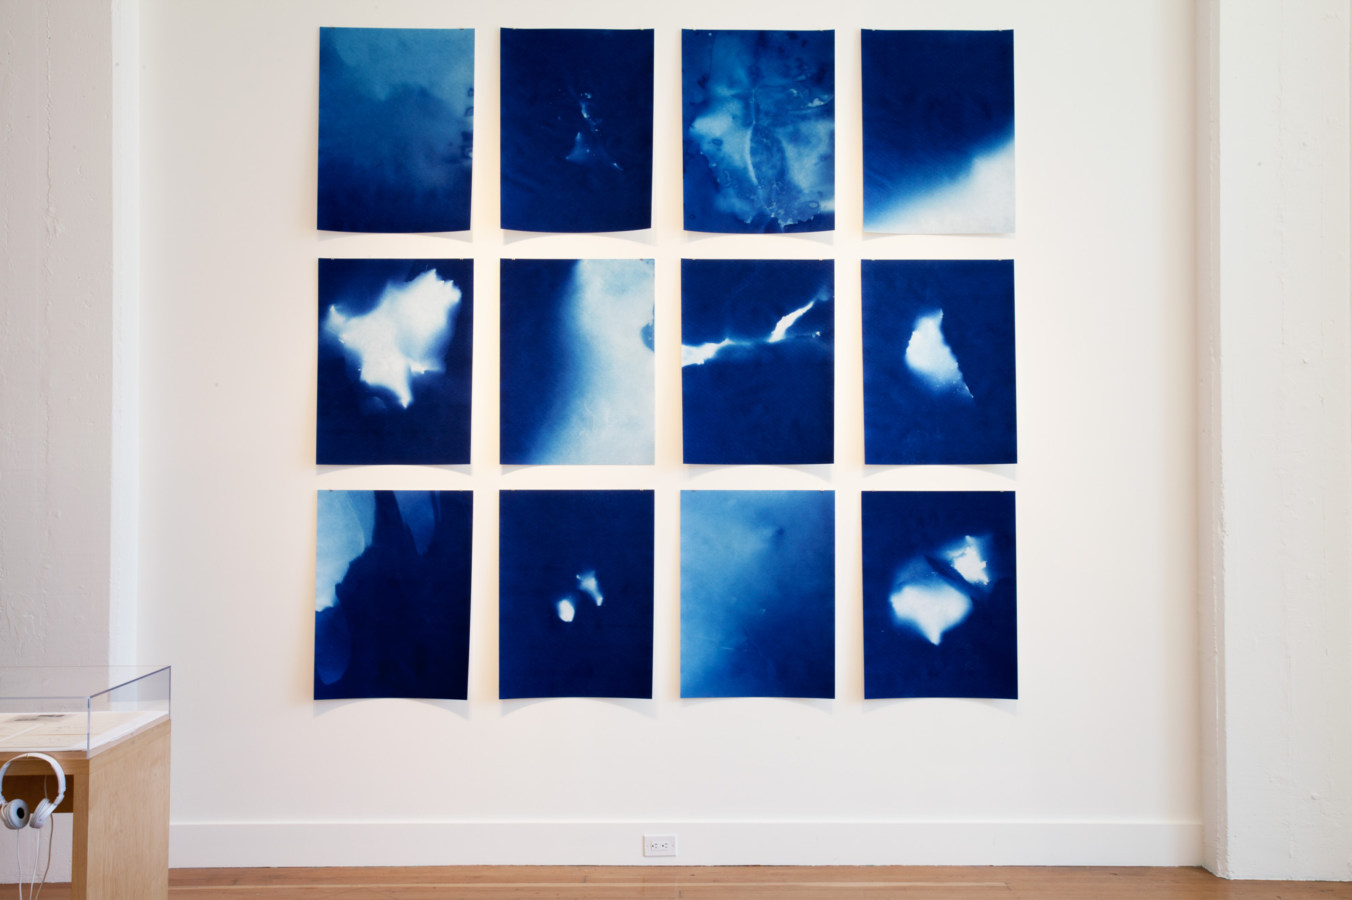 Color image of gird of cyanotypes on white gallery wall